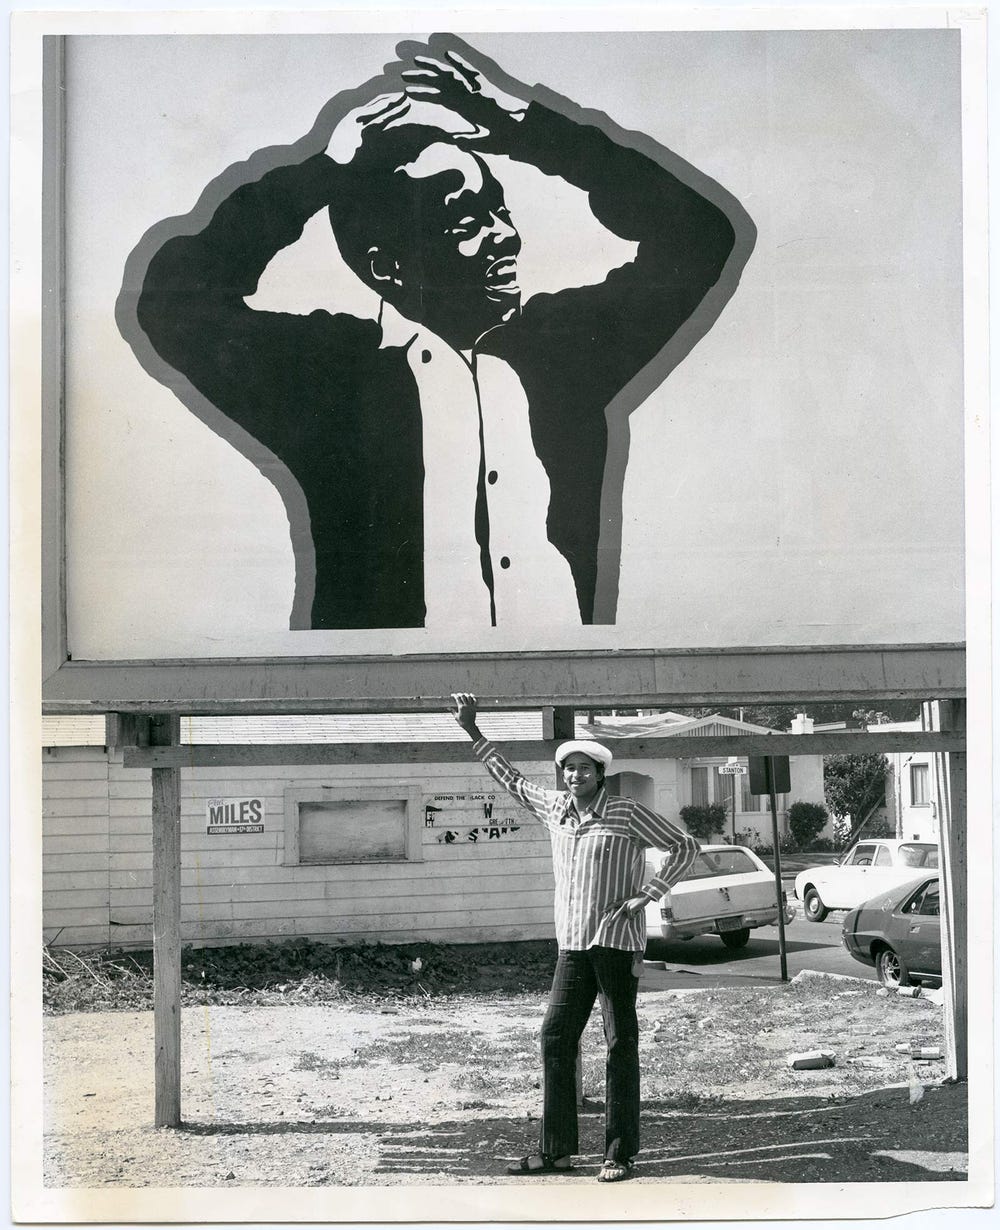 Cleveland Bellow photographed standing under his billboard, showing a Black boy with his hands raised above his head